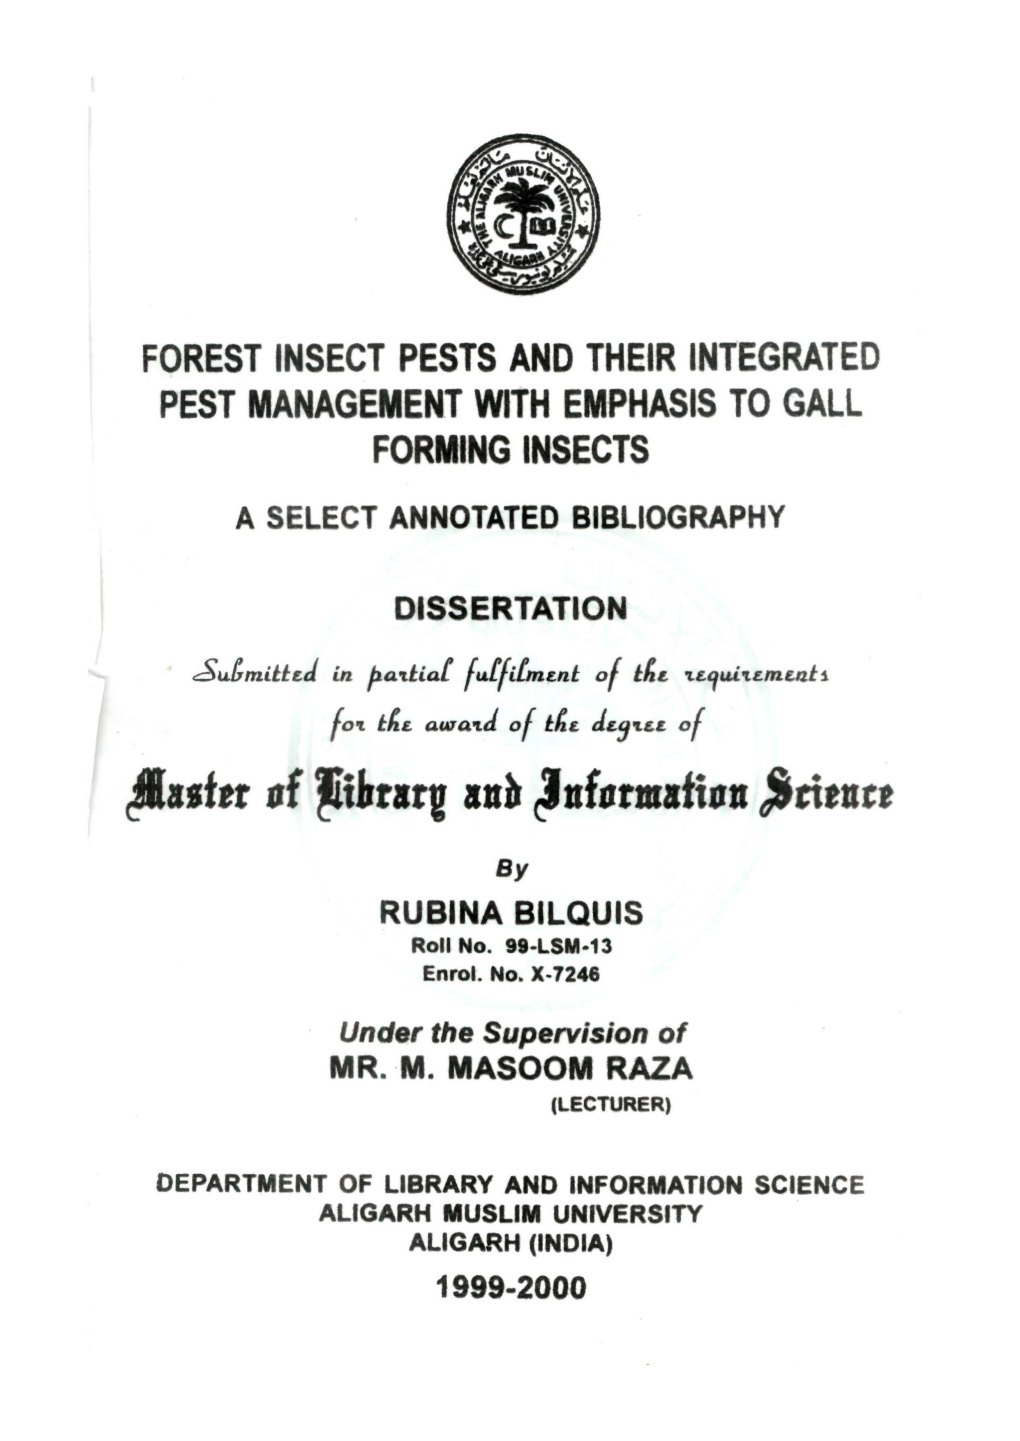 Forest Insect Pests and Their Integrated Pest Management with Emphasis to Gall Forming Insects